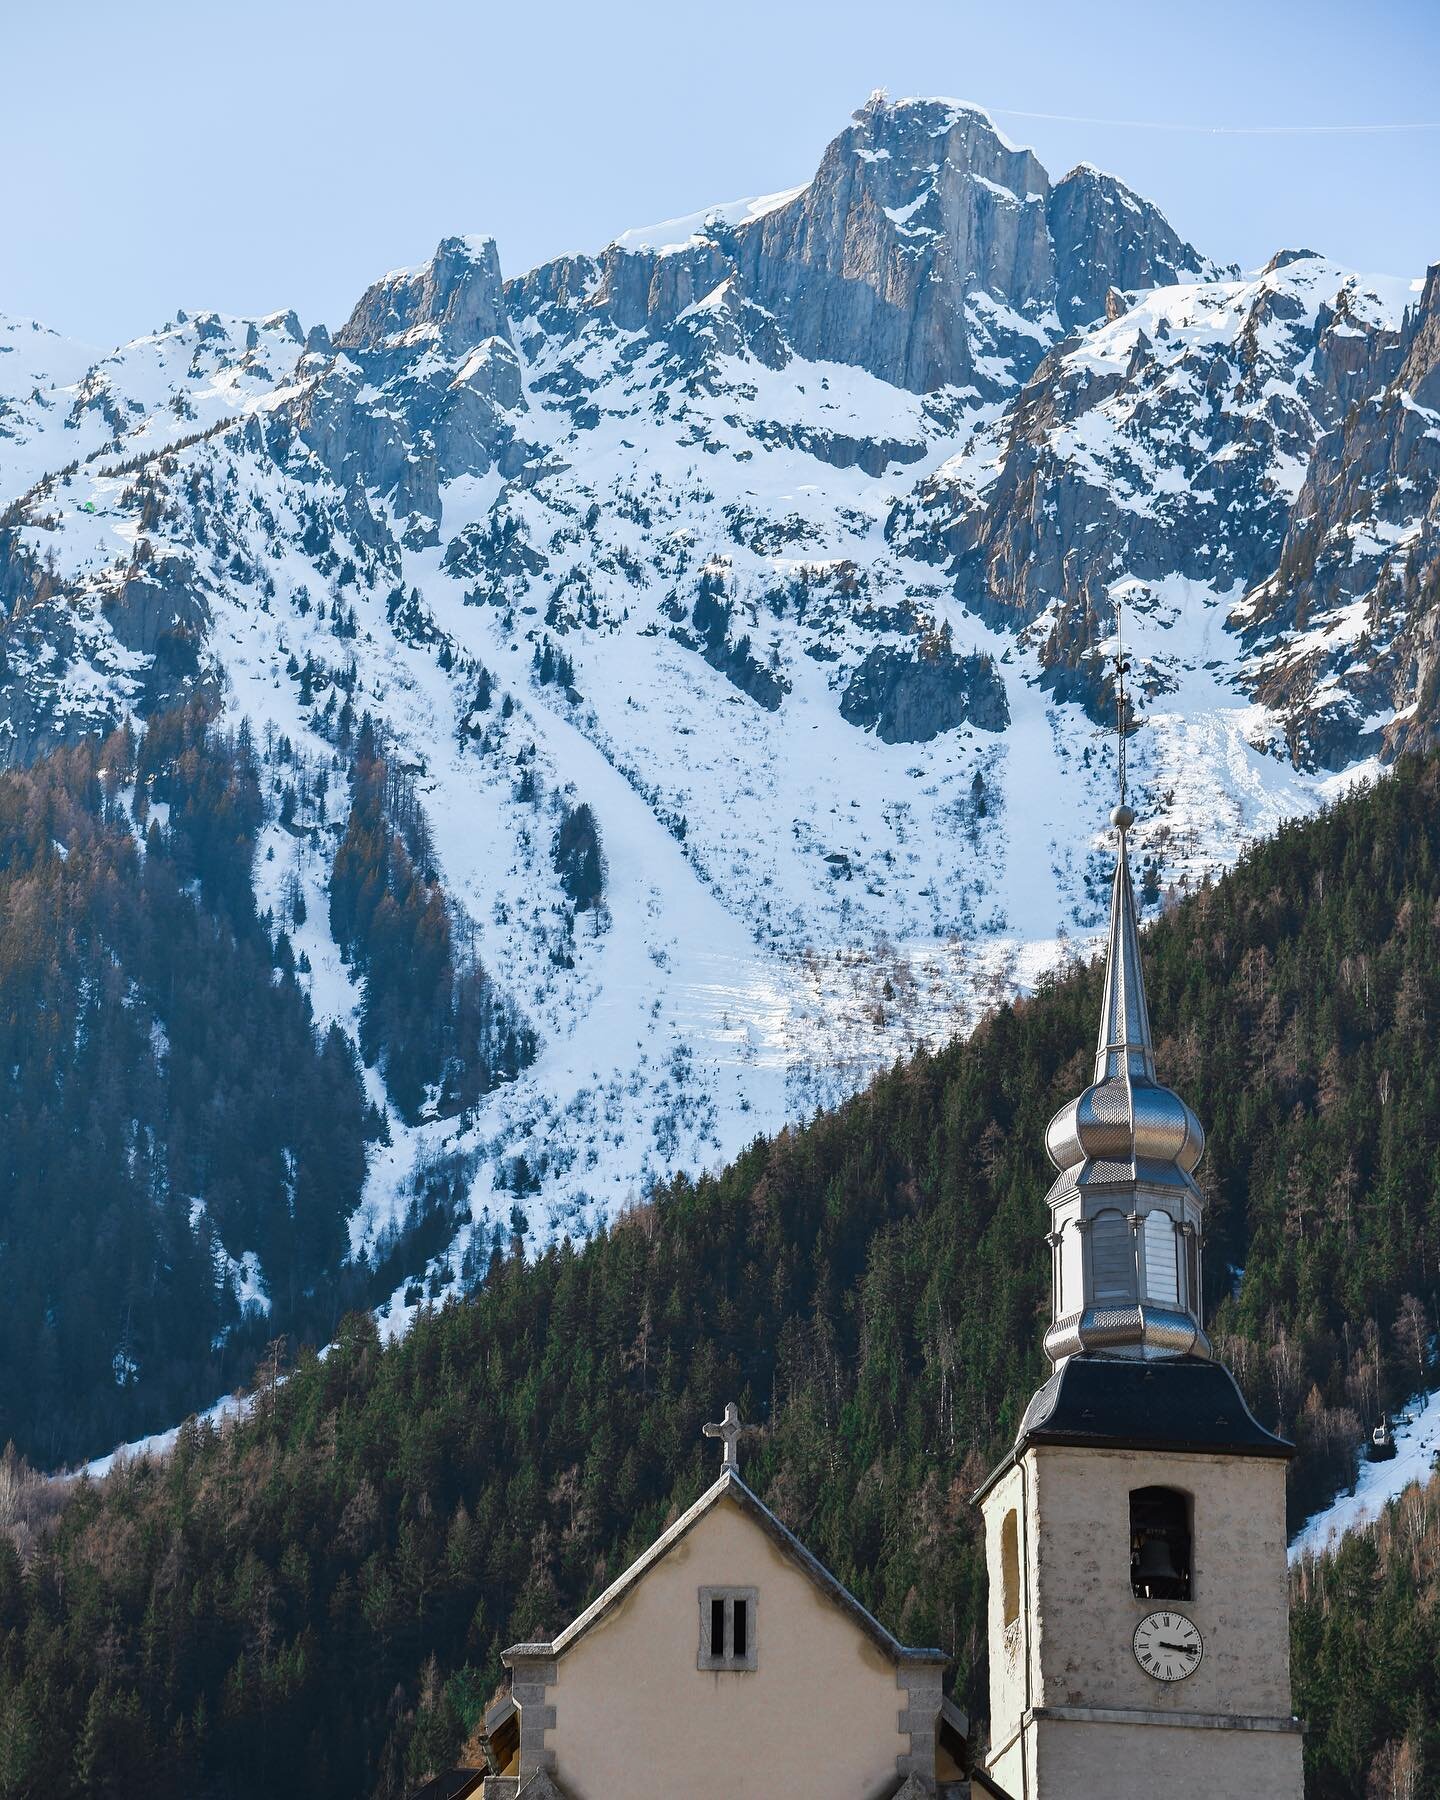 Welcome to Chamonix, France 🇫🇷 This beautiful area of southeastern France is known for its stunning panoramic views and incredible skiing. These French peaks are something else 🙌